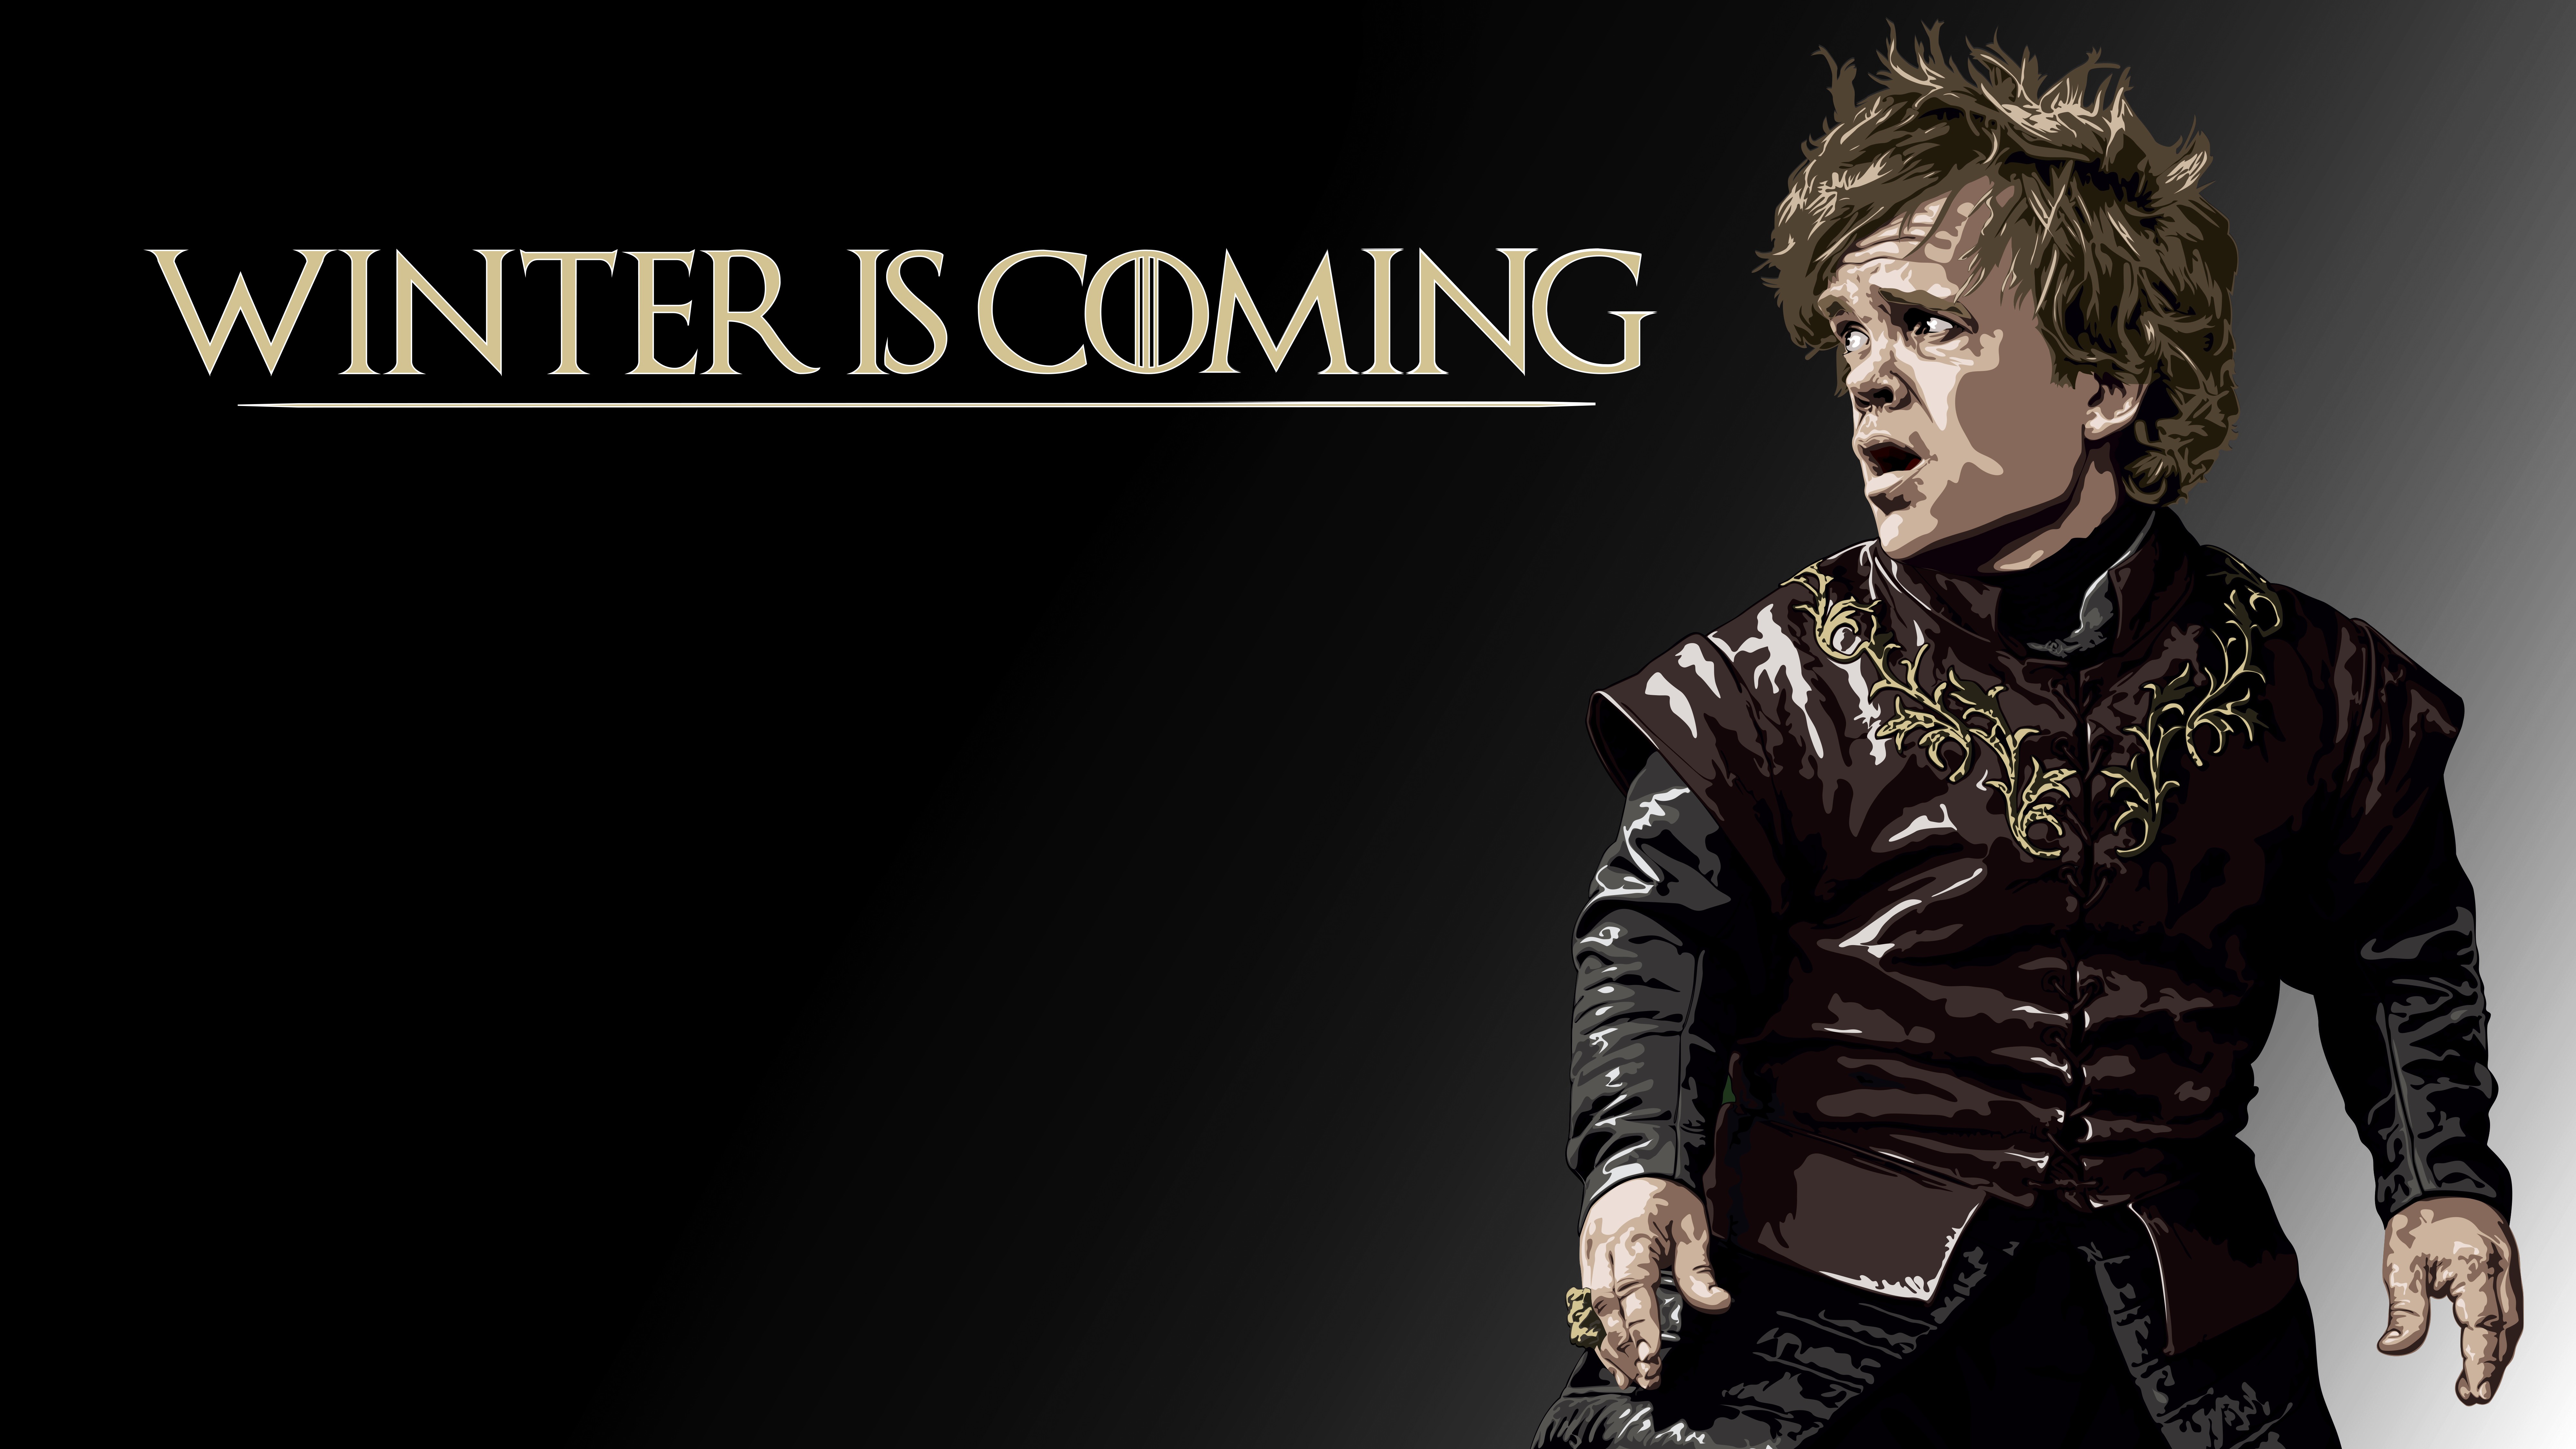 Game Of Thrones, Winter Is Coming, Tyrion Lannister Wallpaper